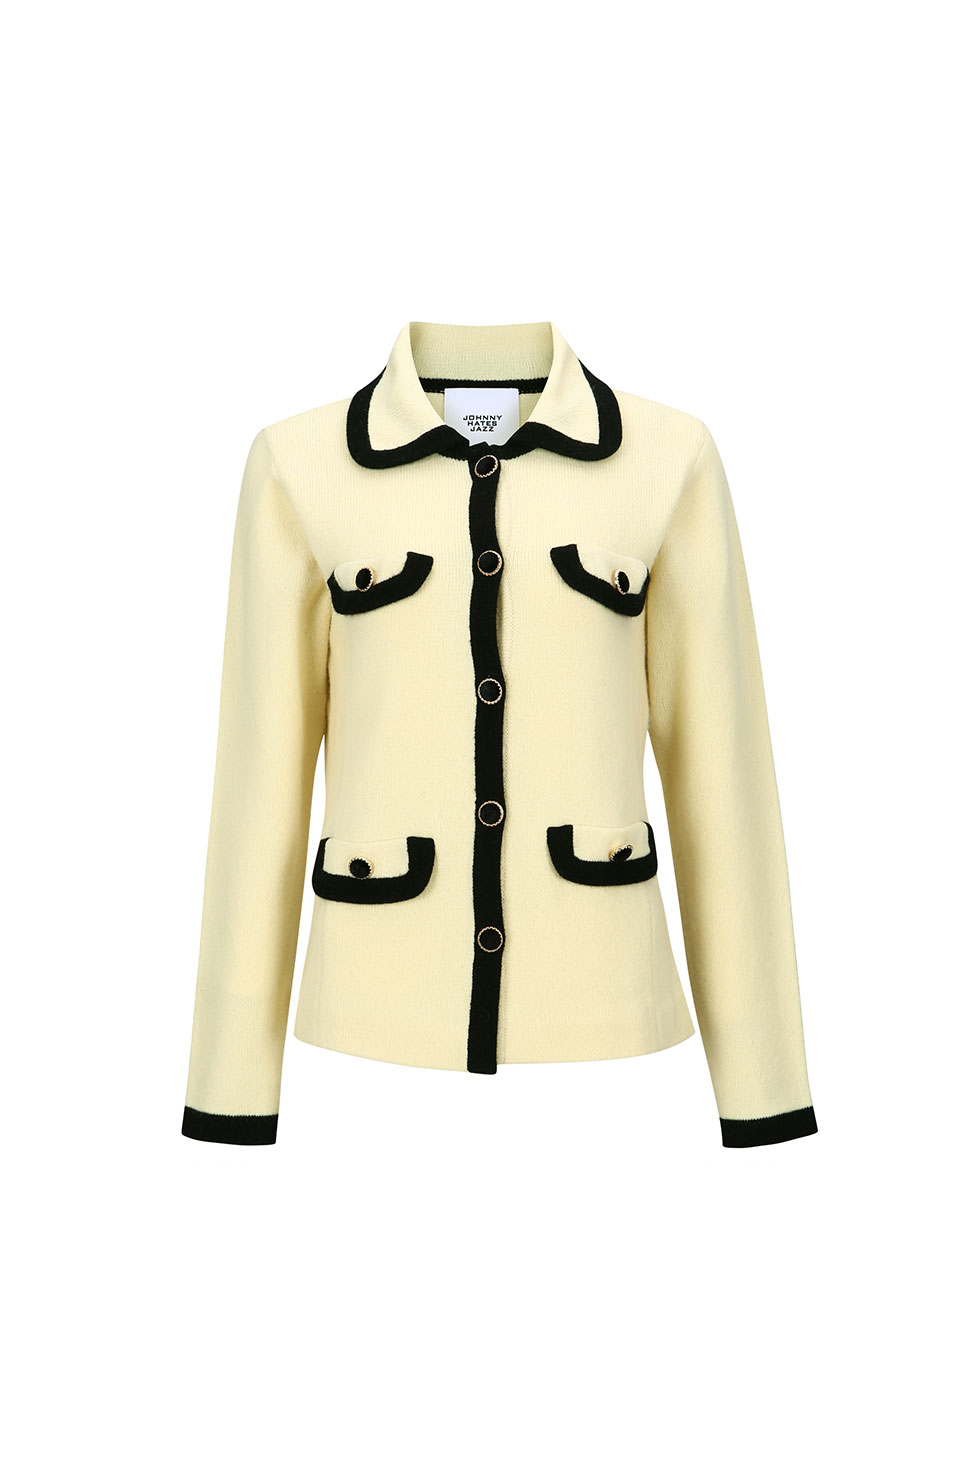 CONTRASTED SINGLE KNIT JACKET - YELLOW